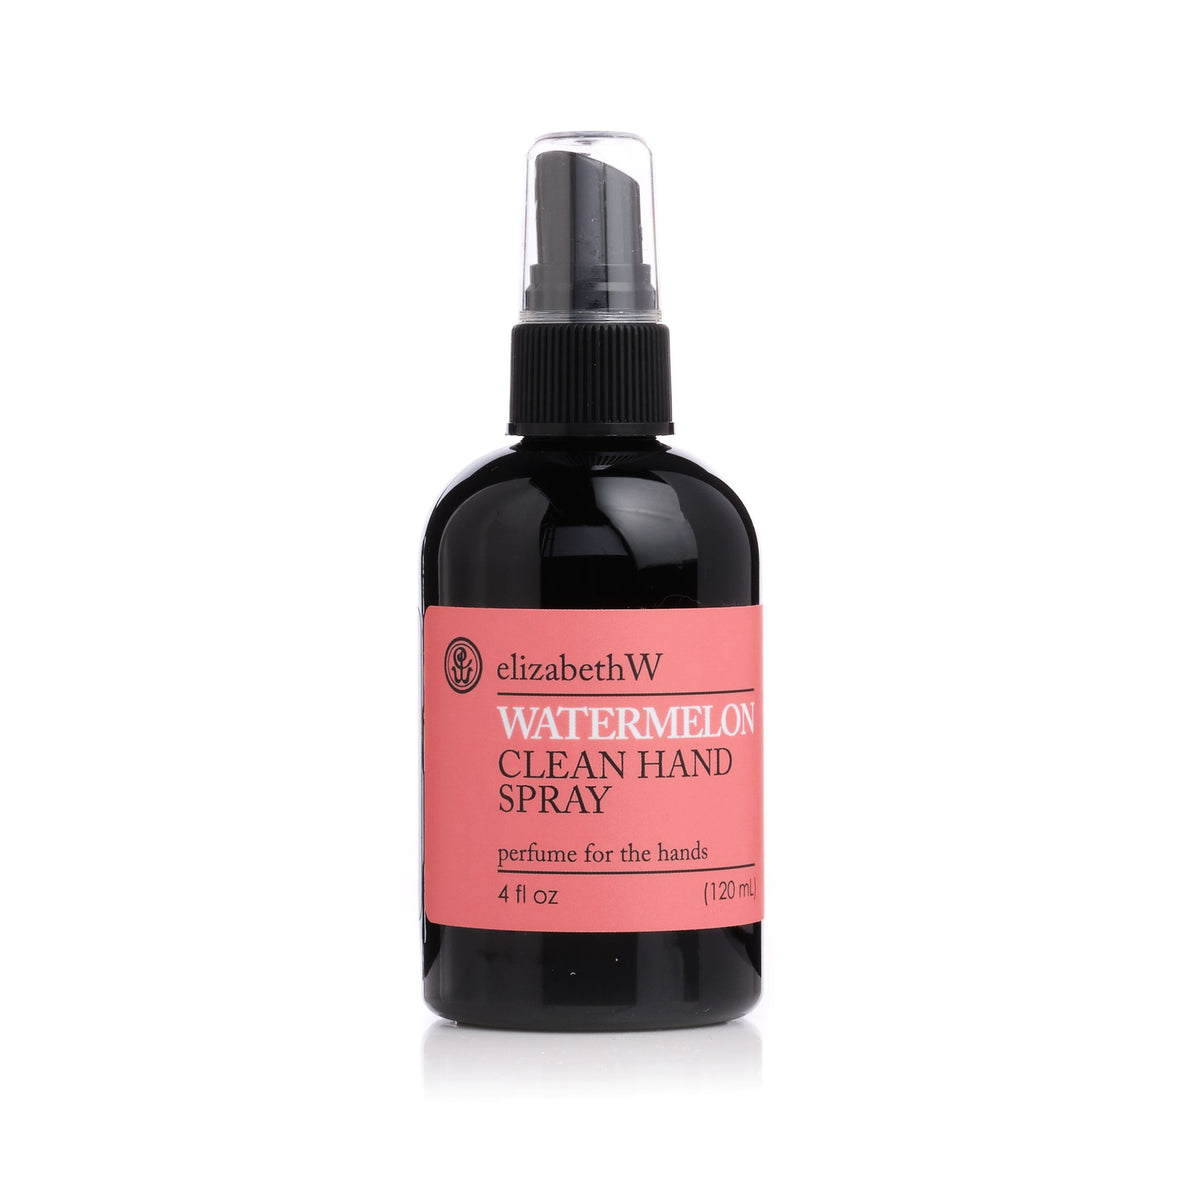 A bottle of elizabeth W Botanical Beauty Watermelon Clean Hand Spray with essential oils and a spray top, labeled clearly in elegant typography on a white background.